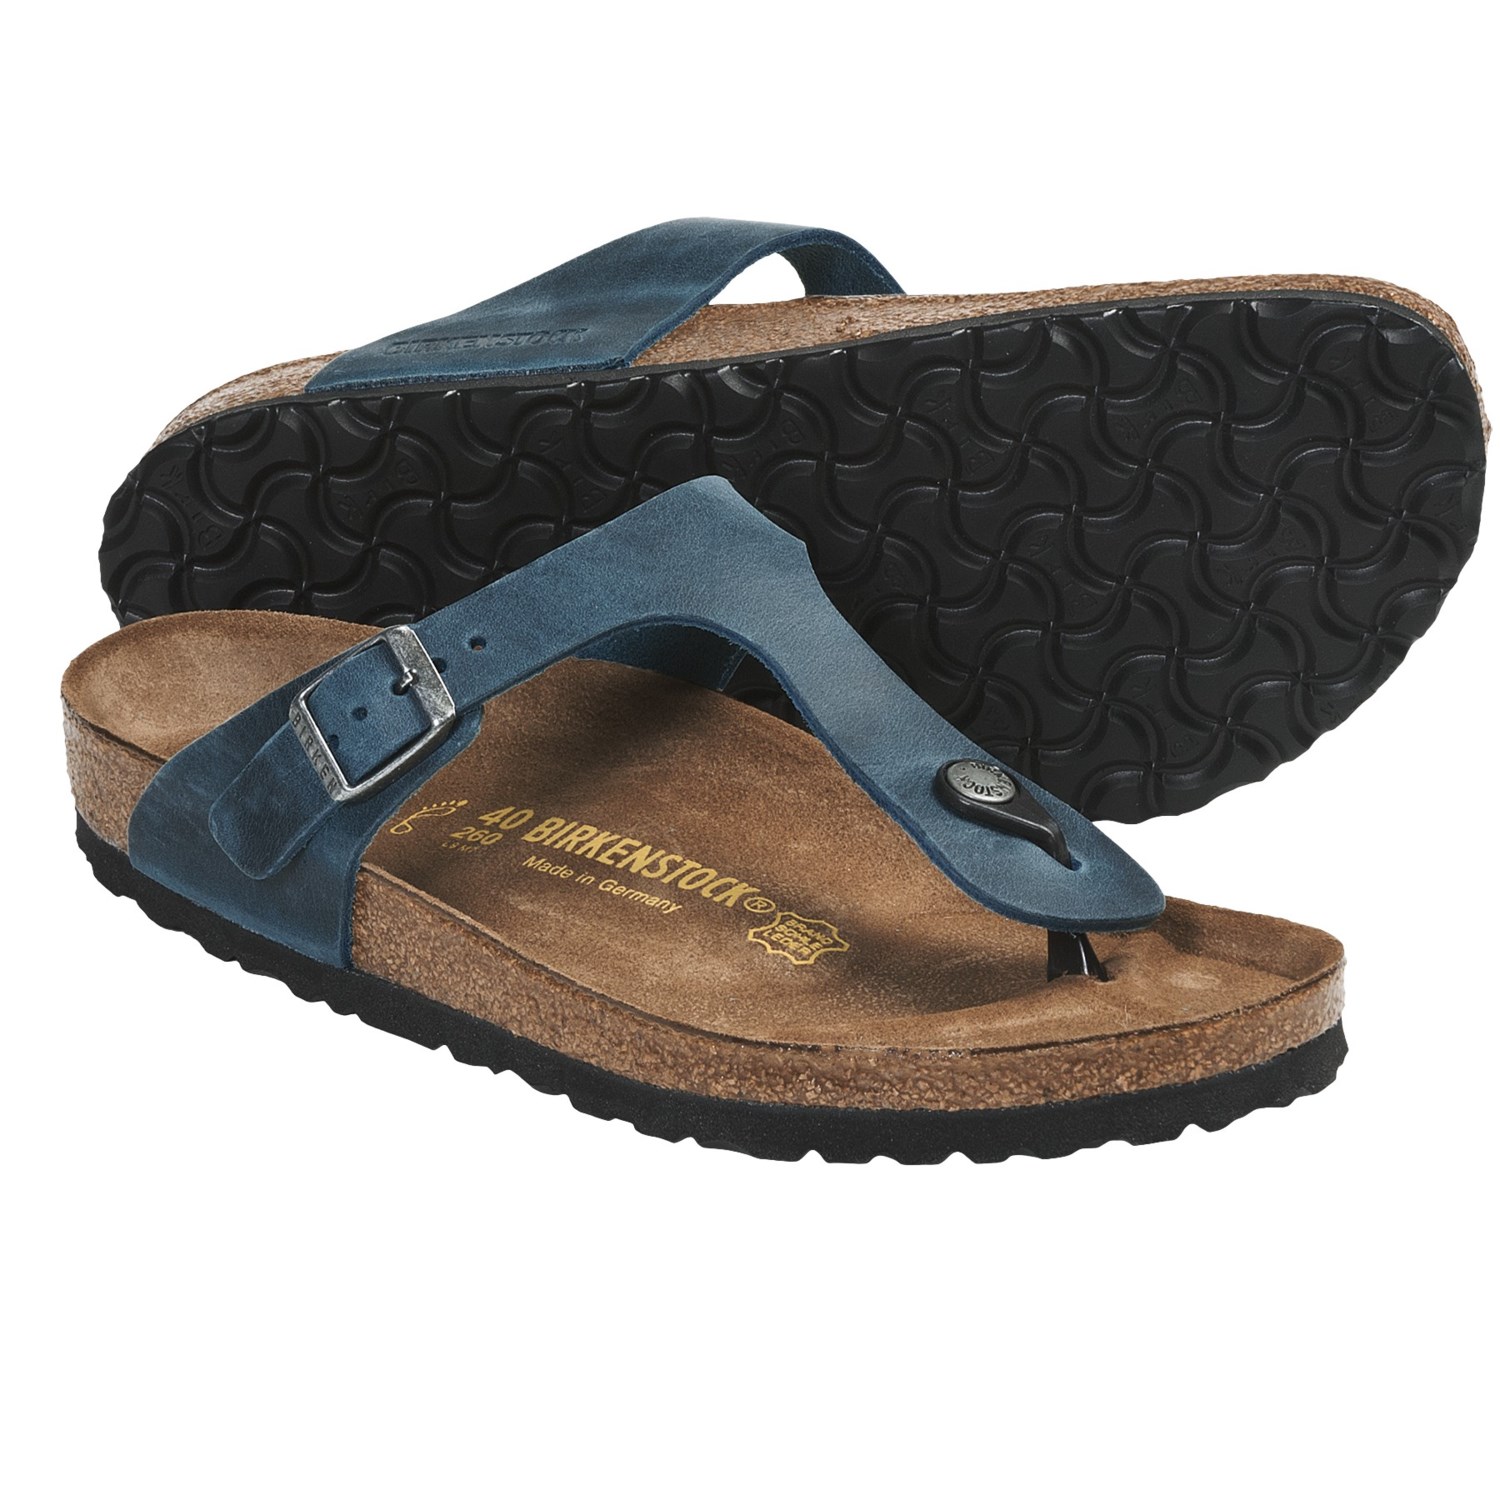 Birkenstock Gizeh Sandals - Oiled Leather (For Women) in Turquoise ...